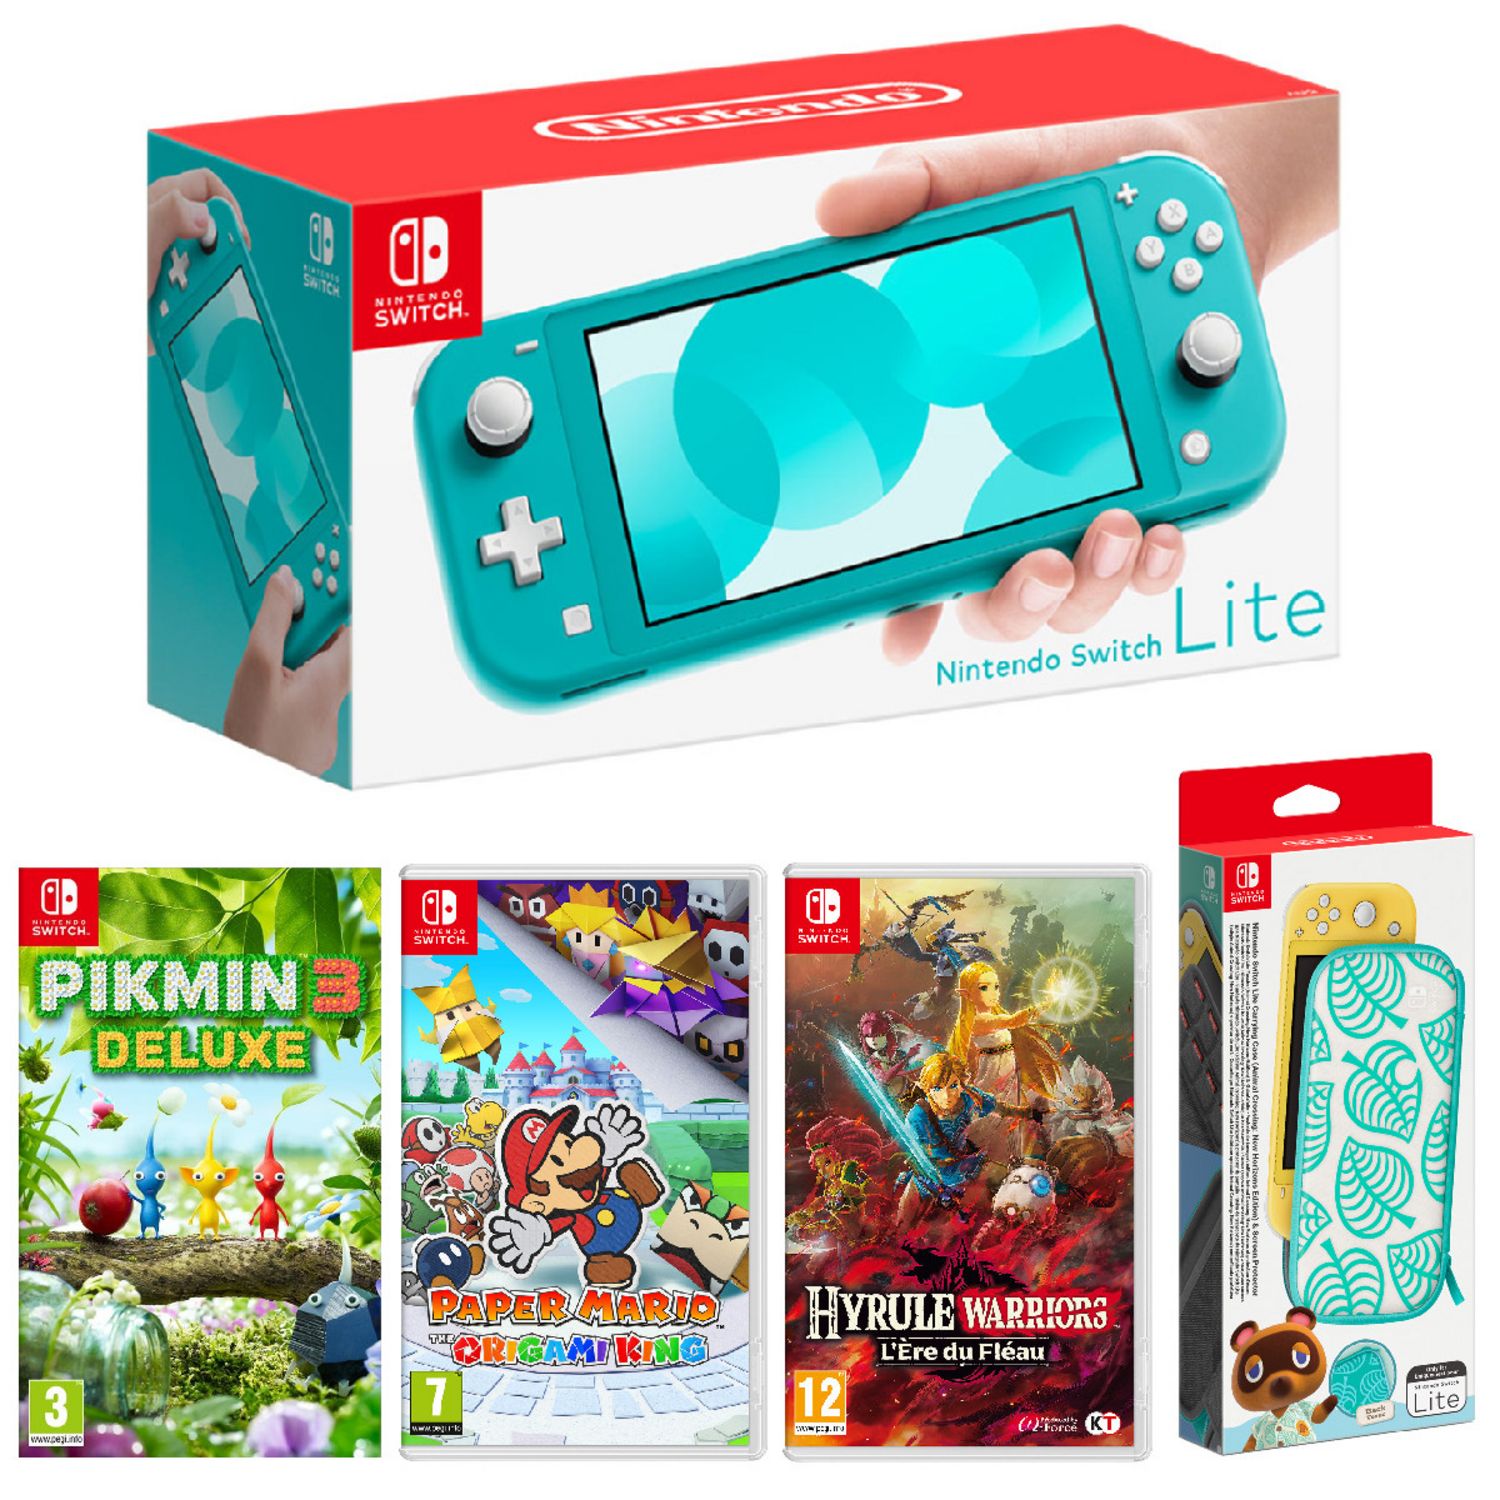 NINTENDO Console Nintendo Switch Lite Turquoise + Pikmin 3 + Paper